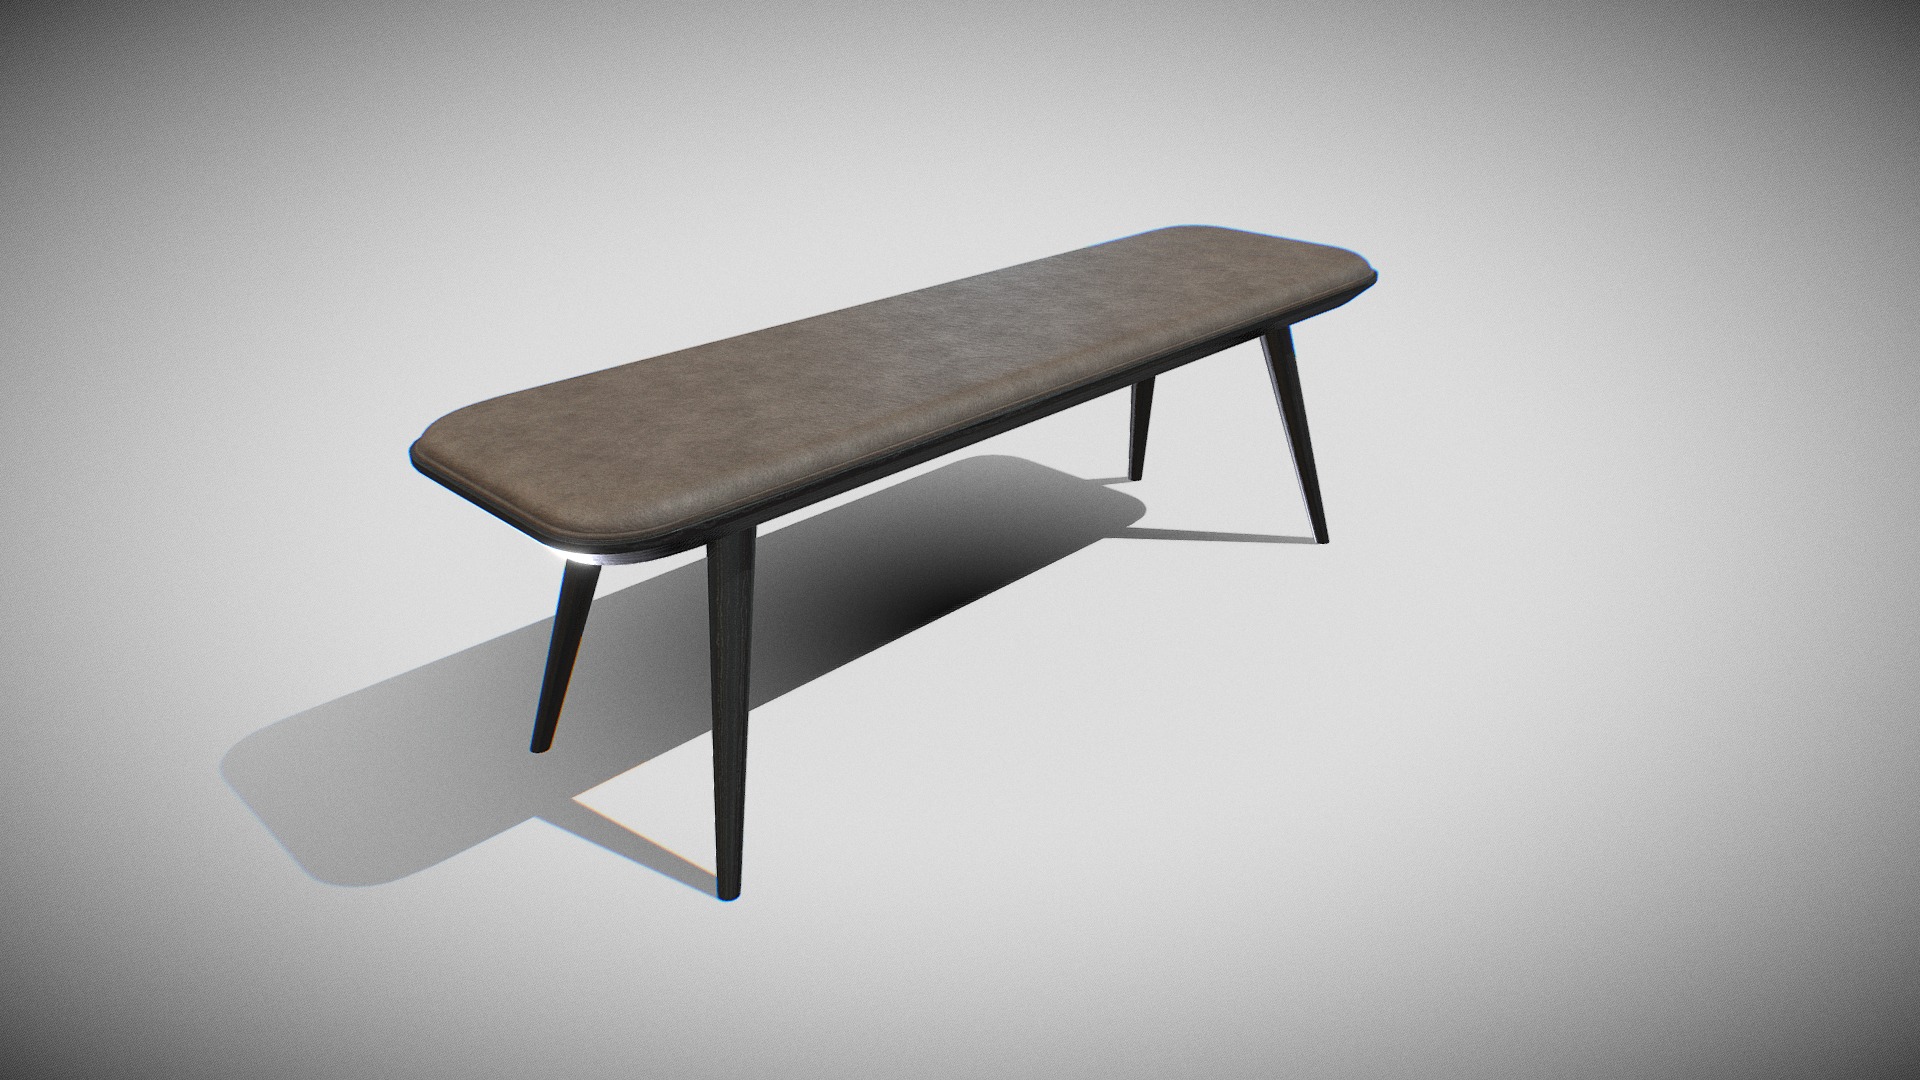 3D model Spine Wood Base Bench-Model 1717 v-02 - This is a 3D model of the Spine Wood Base Bench-Model 1717 v-02. The 3D model is about a wooden table with a white background.